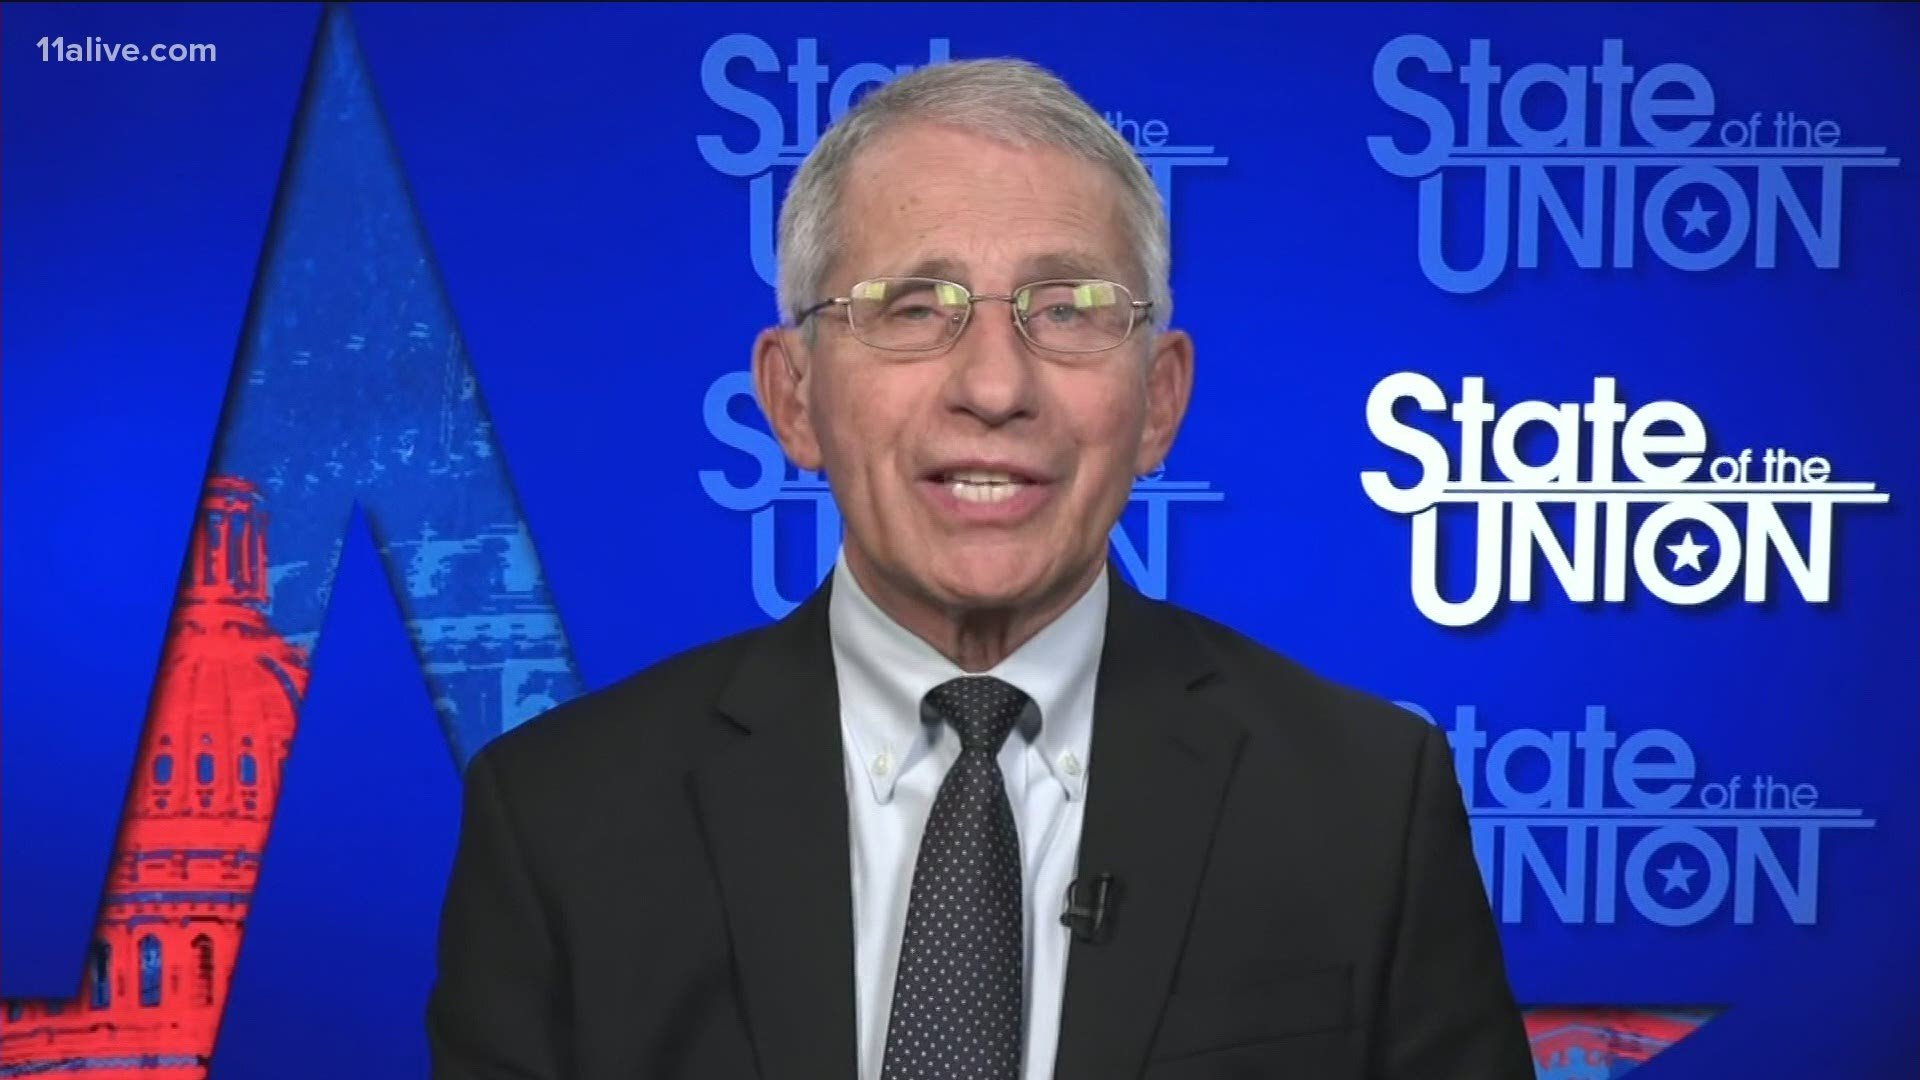 Dr. Fauci said the CDC and FDA did the right thing by pushing back against Pfizer's assertion of a third shot within 12 months.